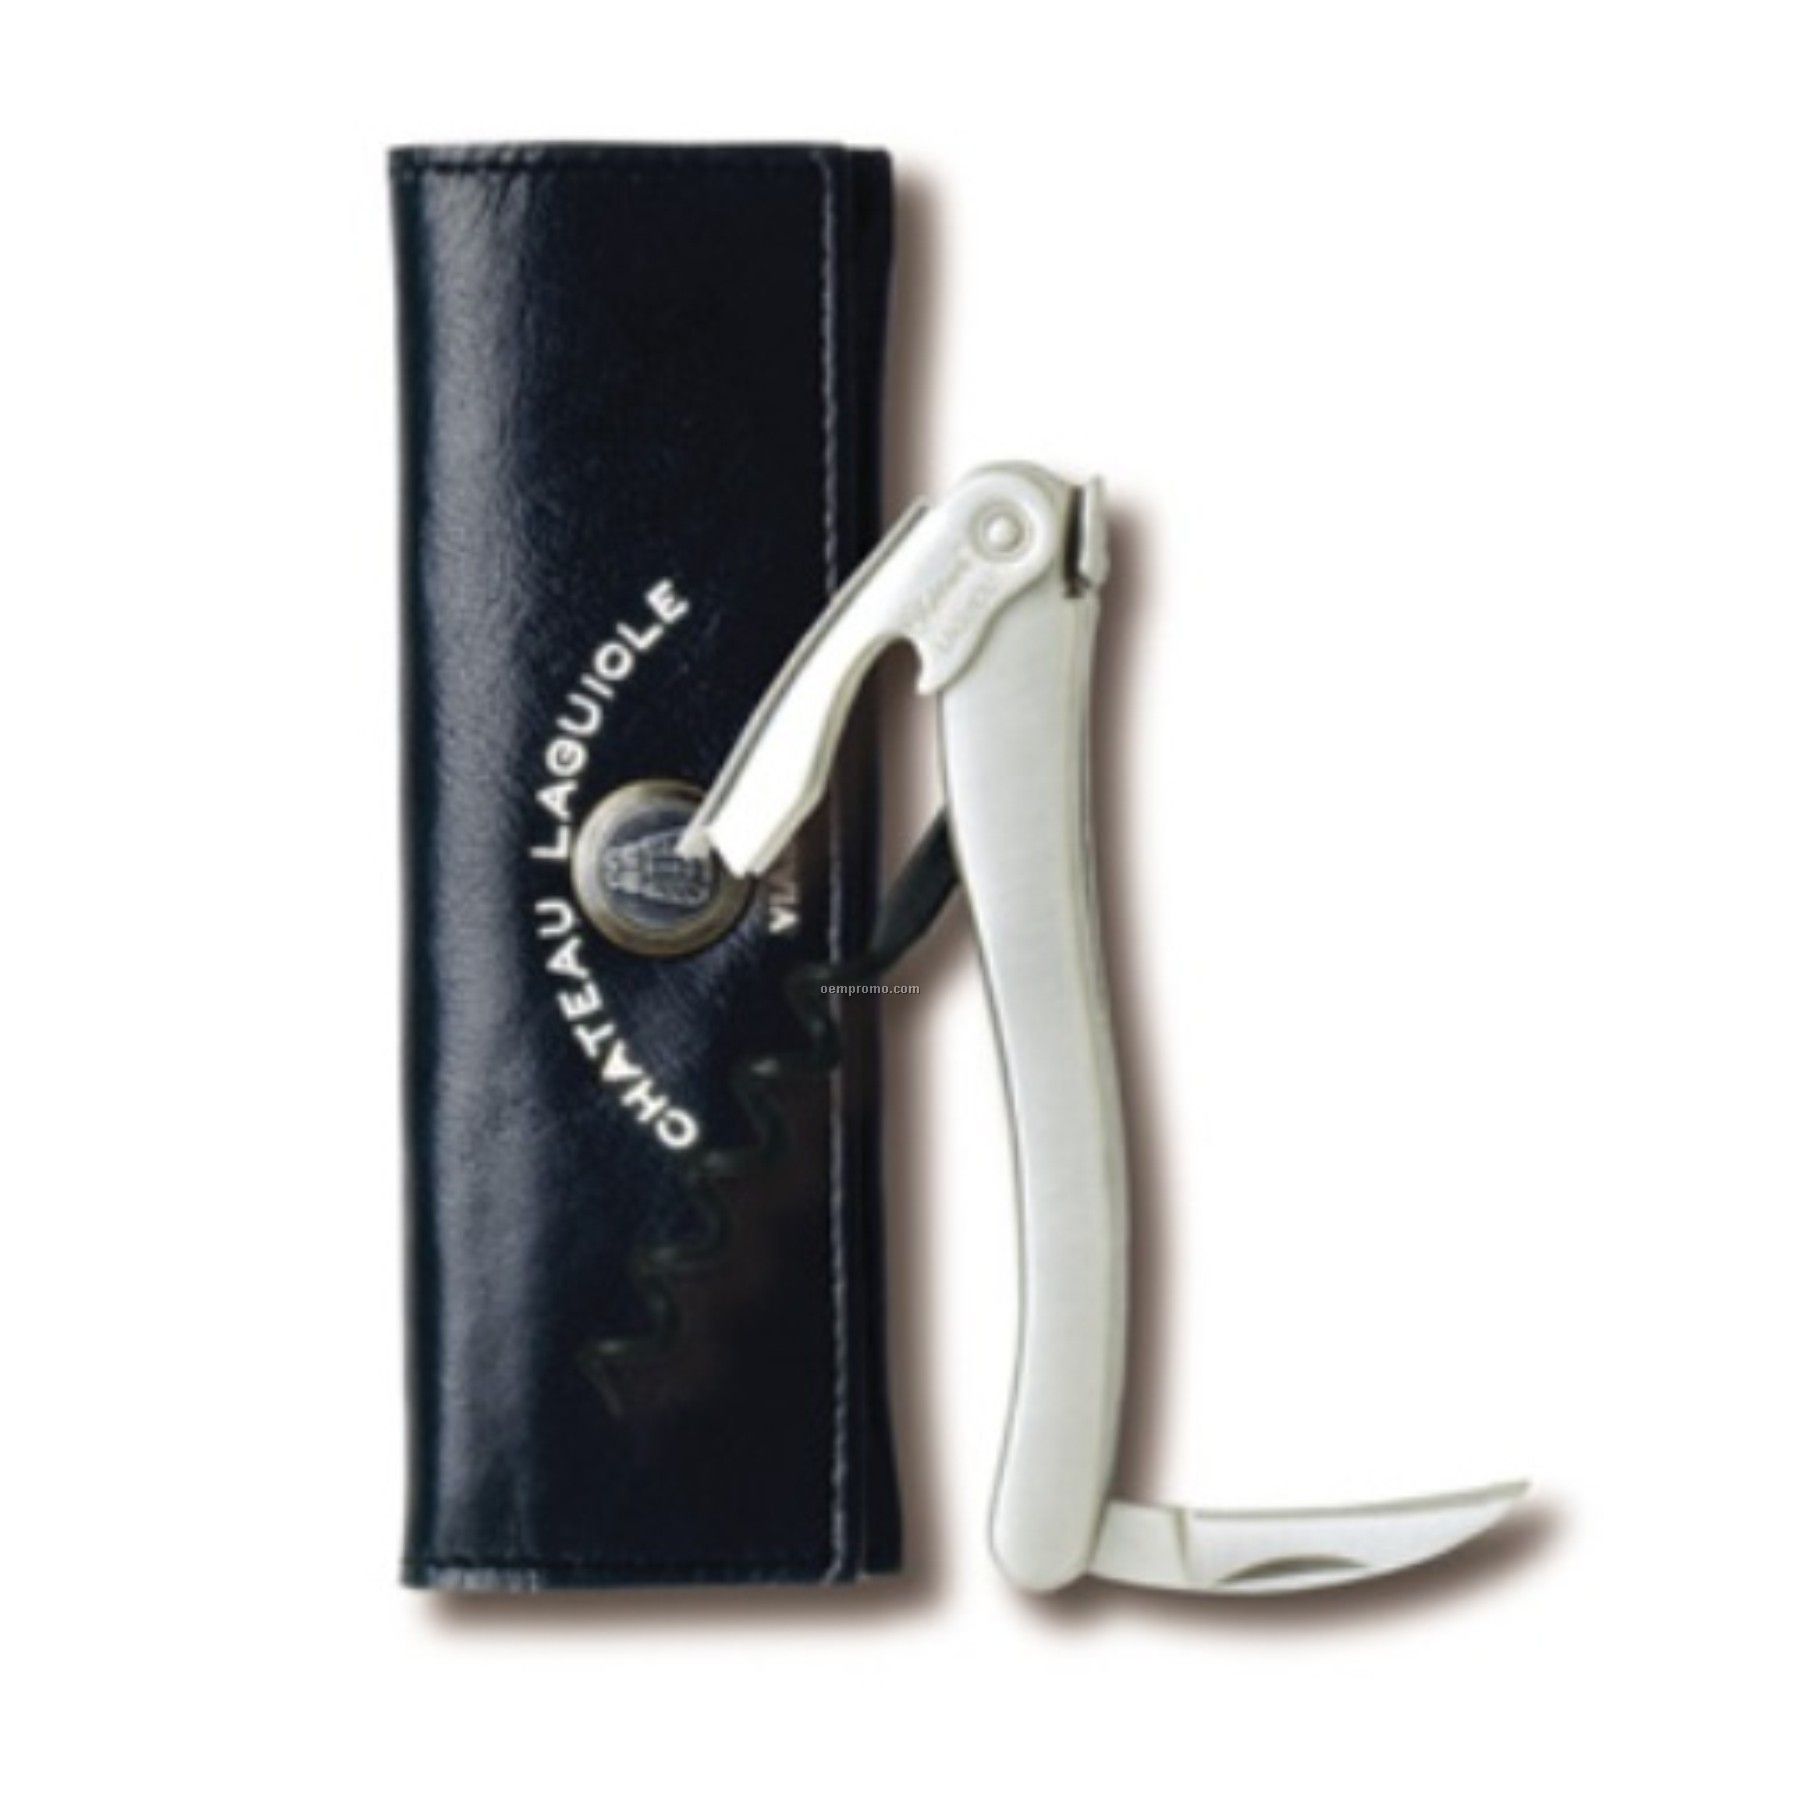 Chateau Laguiole Stainless Steel Waiter's Corkscrew